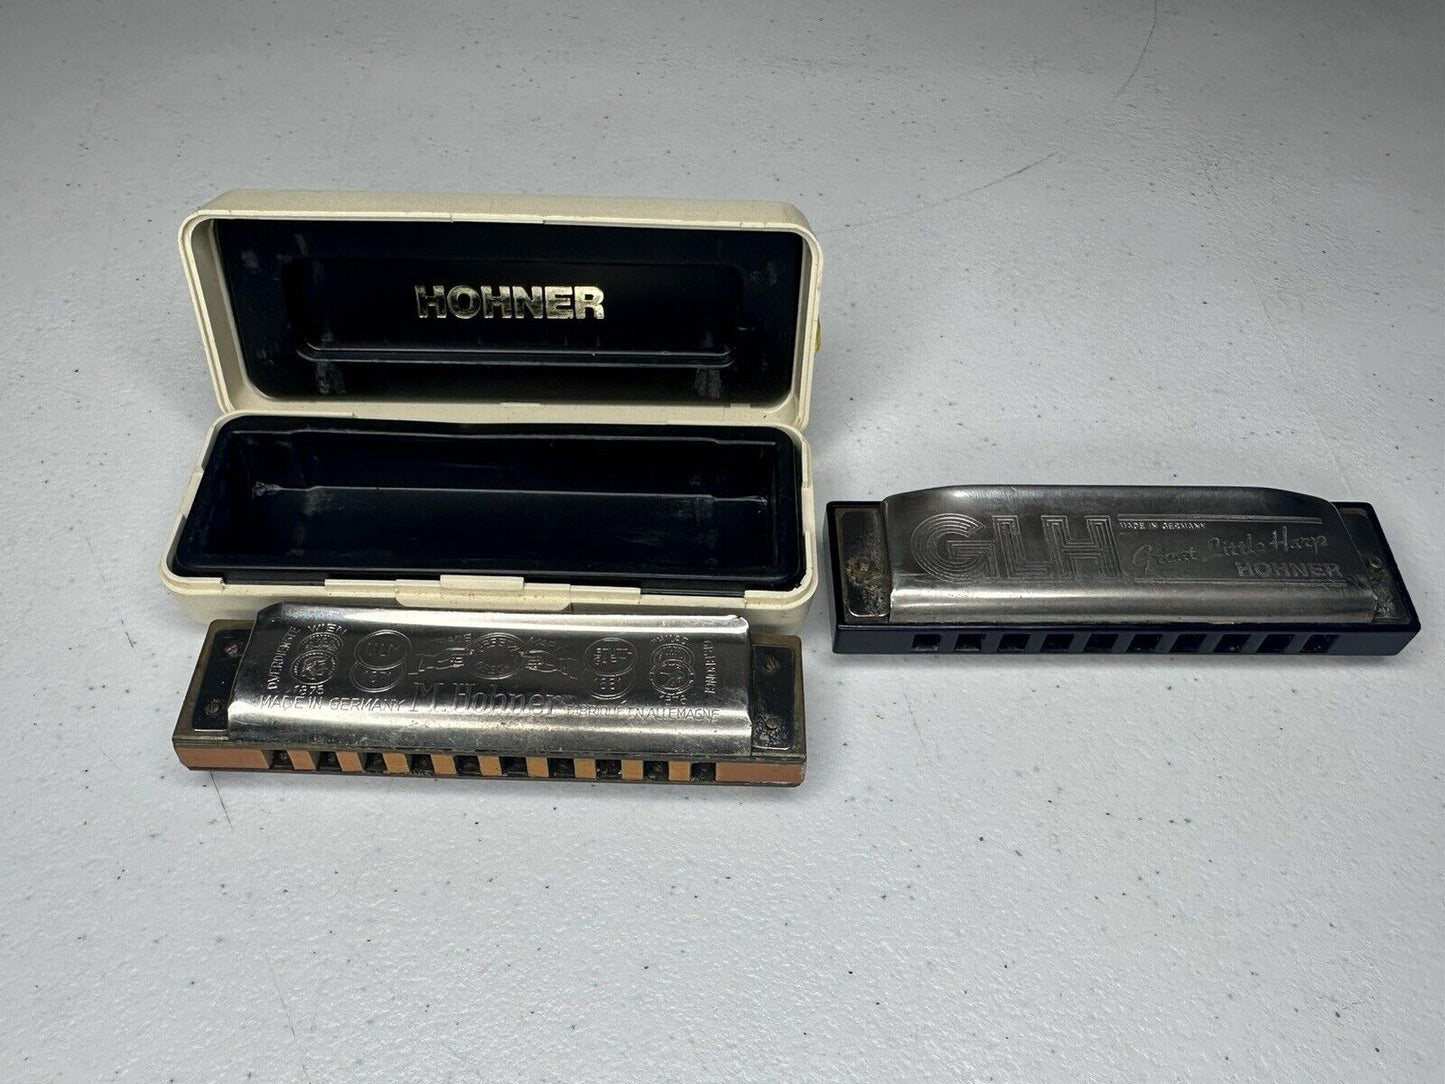 Vintage Hohner Marine Band & GLH Great Little Harp Harmonicas in Original Case - Musical Instrument Collectible - TreasuTiques